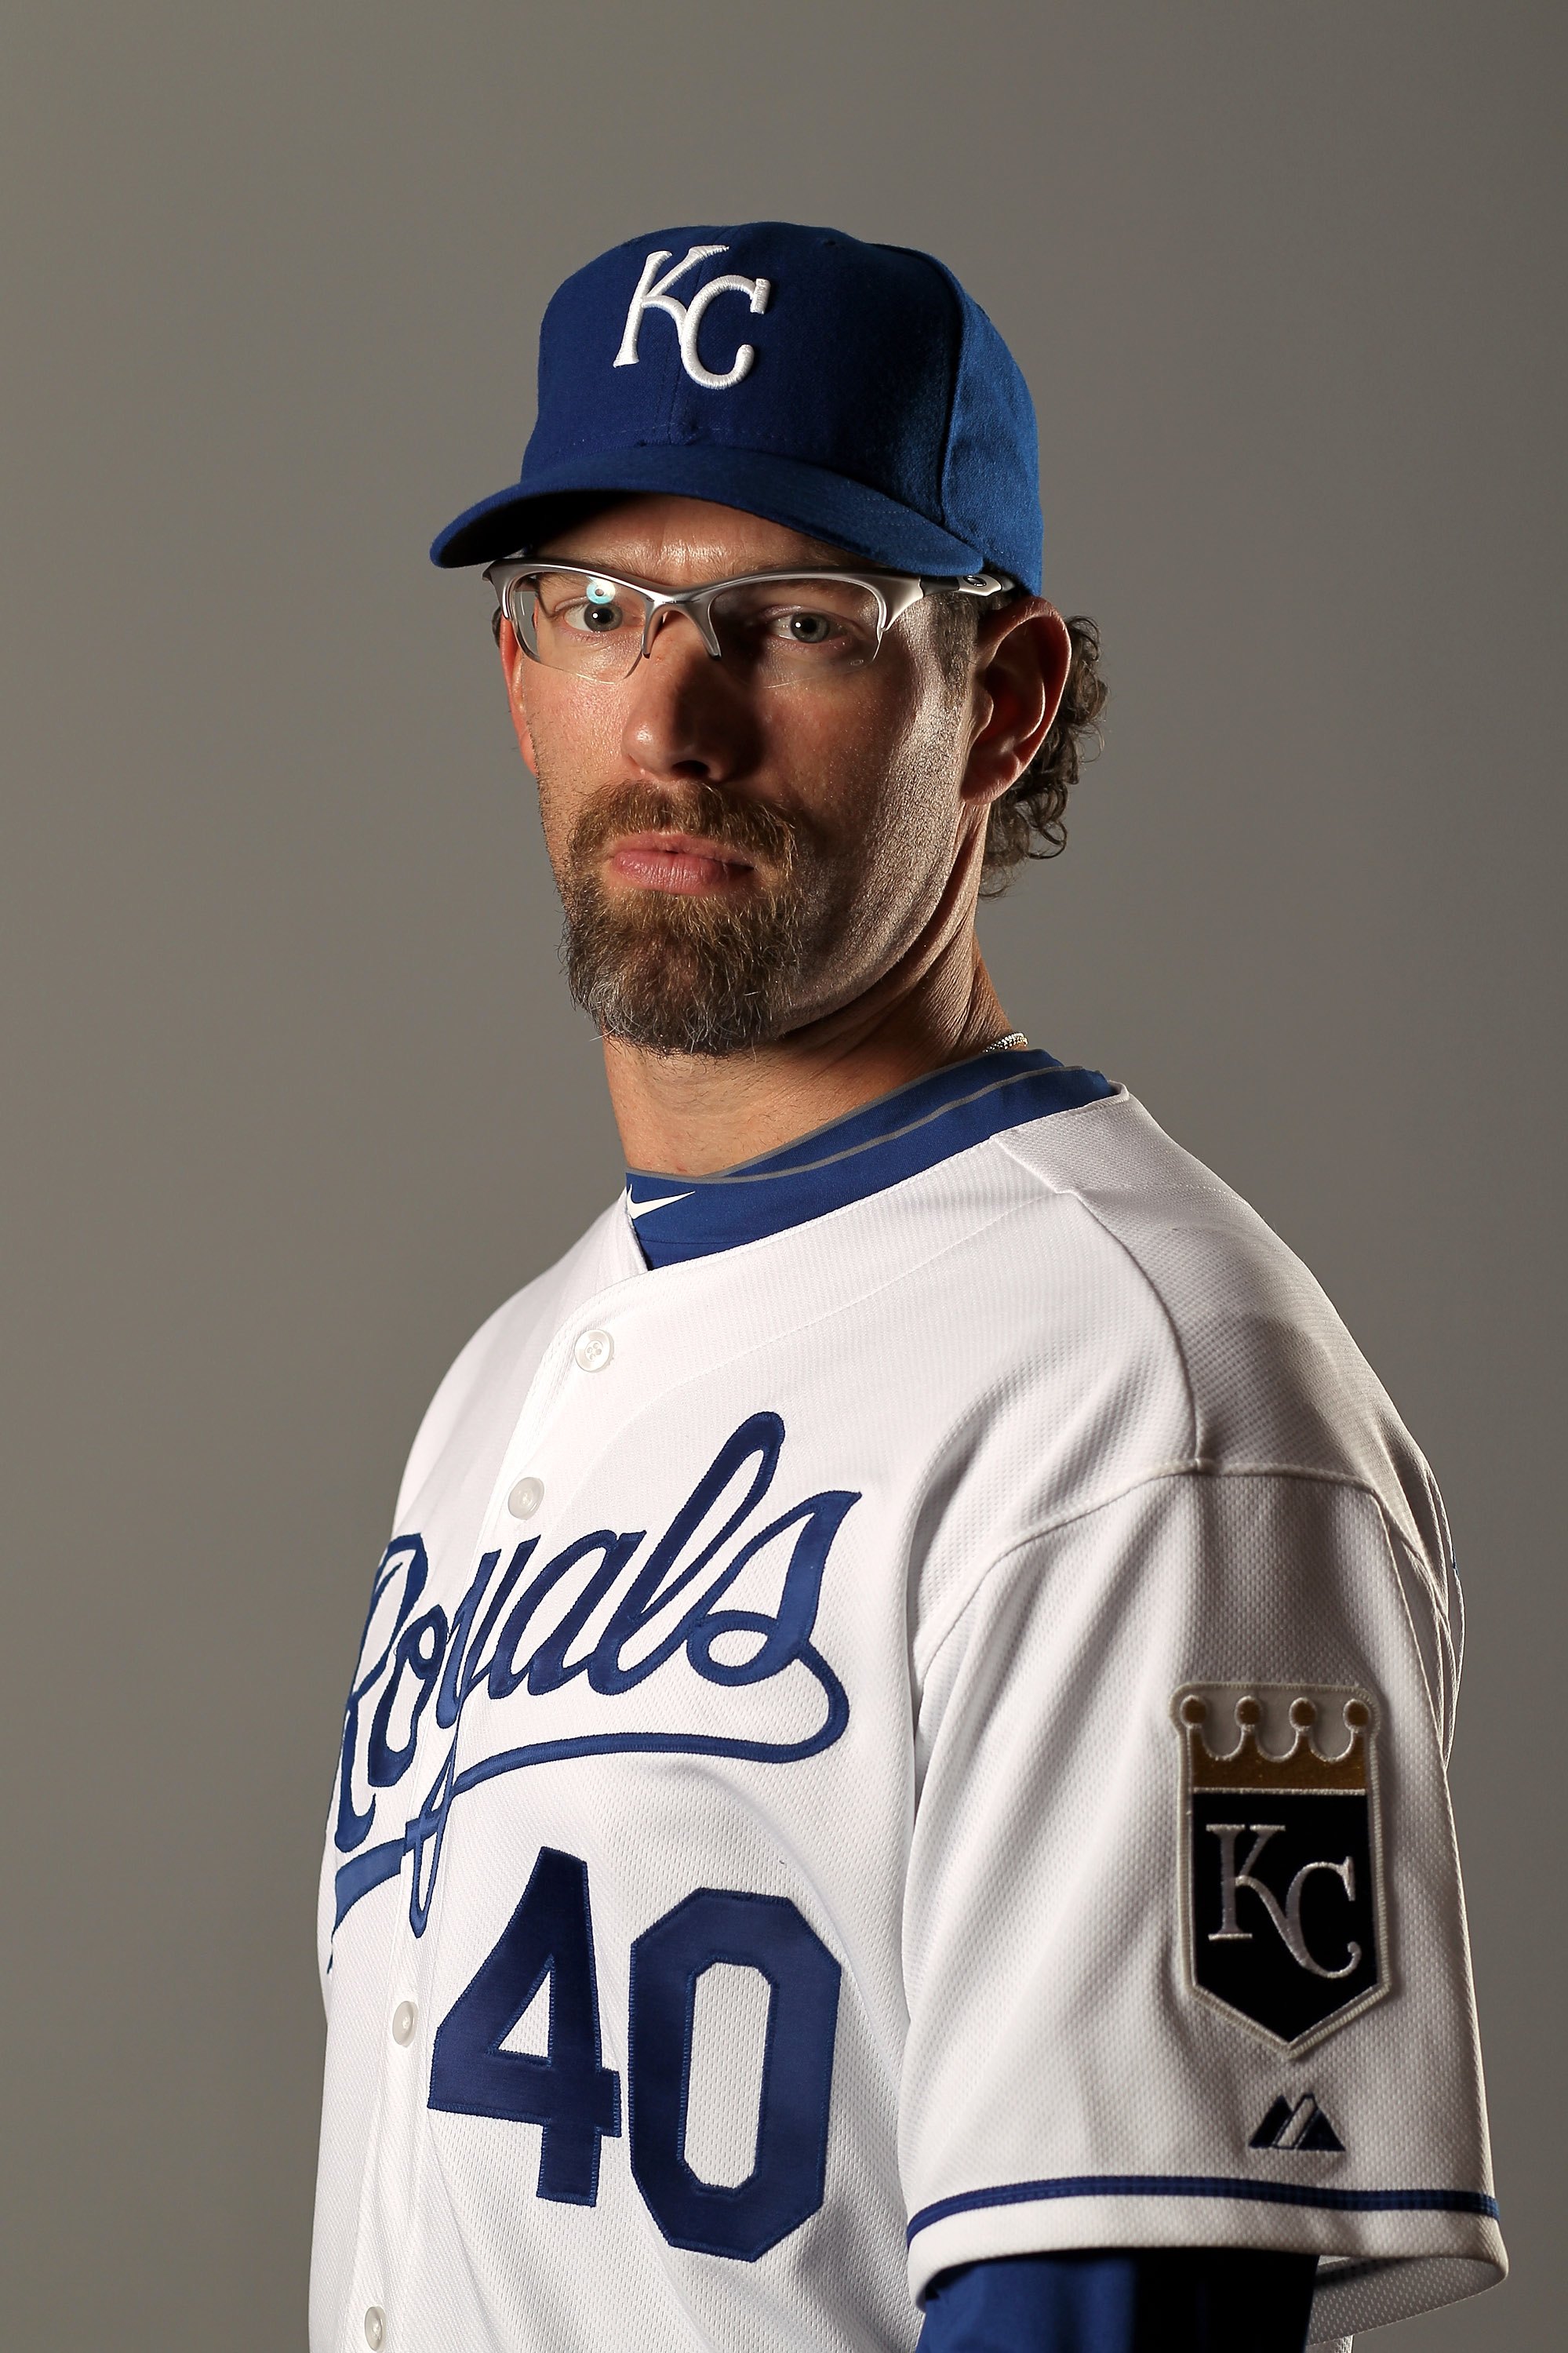 SURPRISE, AZ - FEBRUARY 26:  Kyle Farnsworth of the Kansas City Royals poses during photo media day at the Royals spring training complex on February 26, 2010 in Surprise, Arizona.  (Photo by Ezra Shaw/Getty Images)